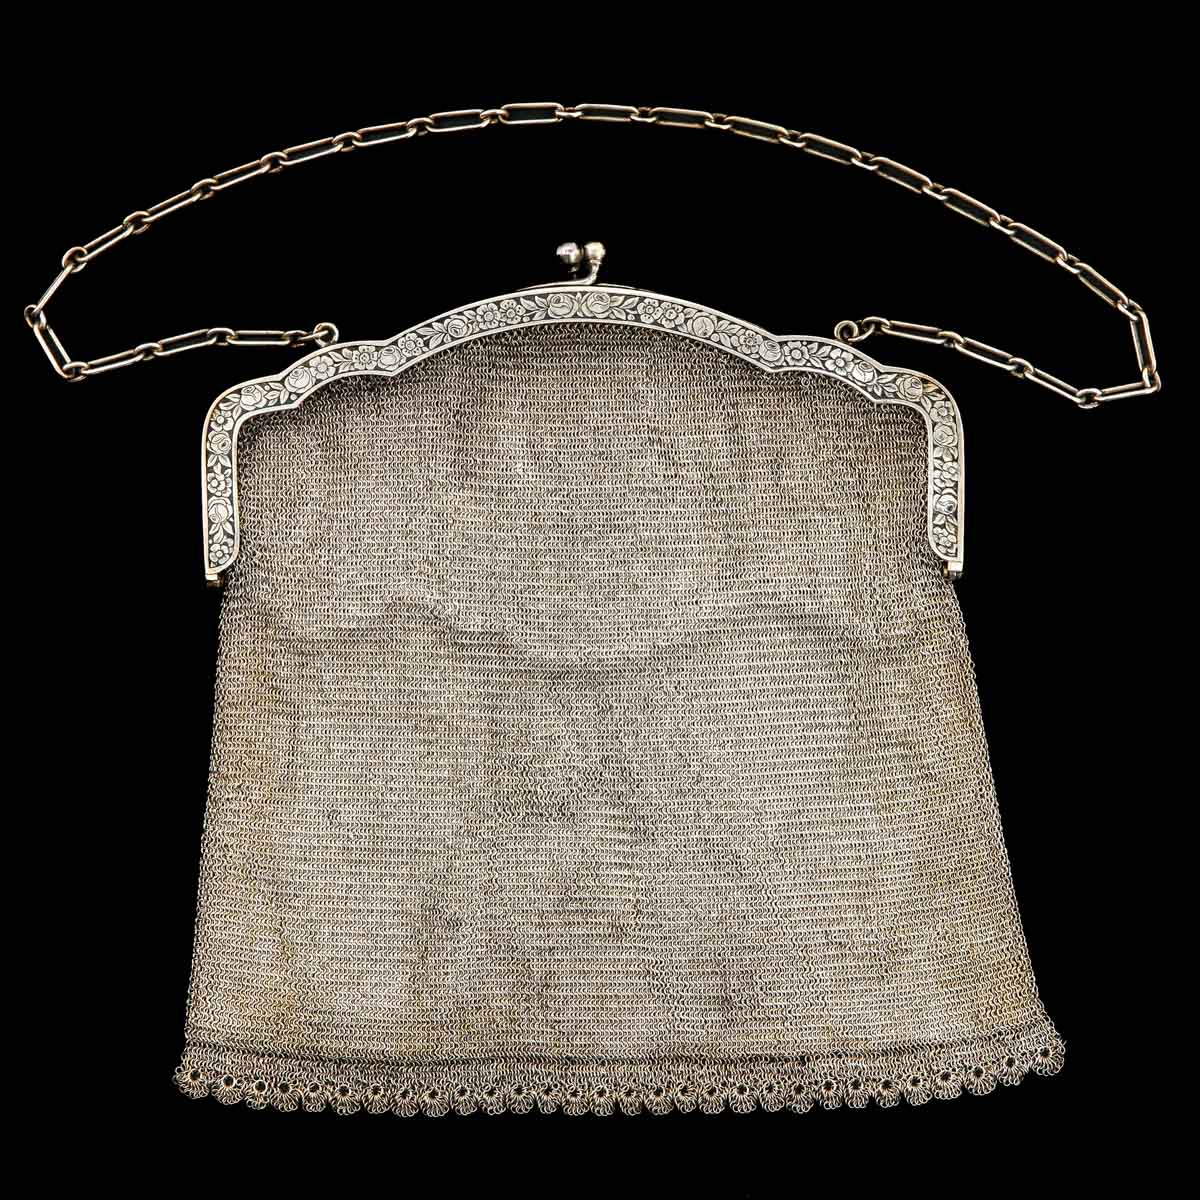 A Collection of Chain Purses - Image 4 of 9